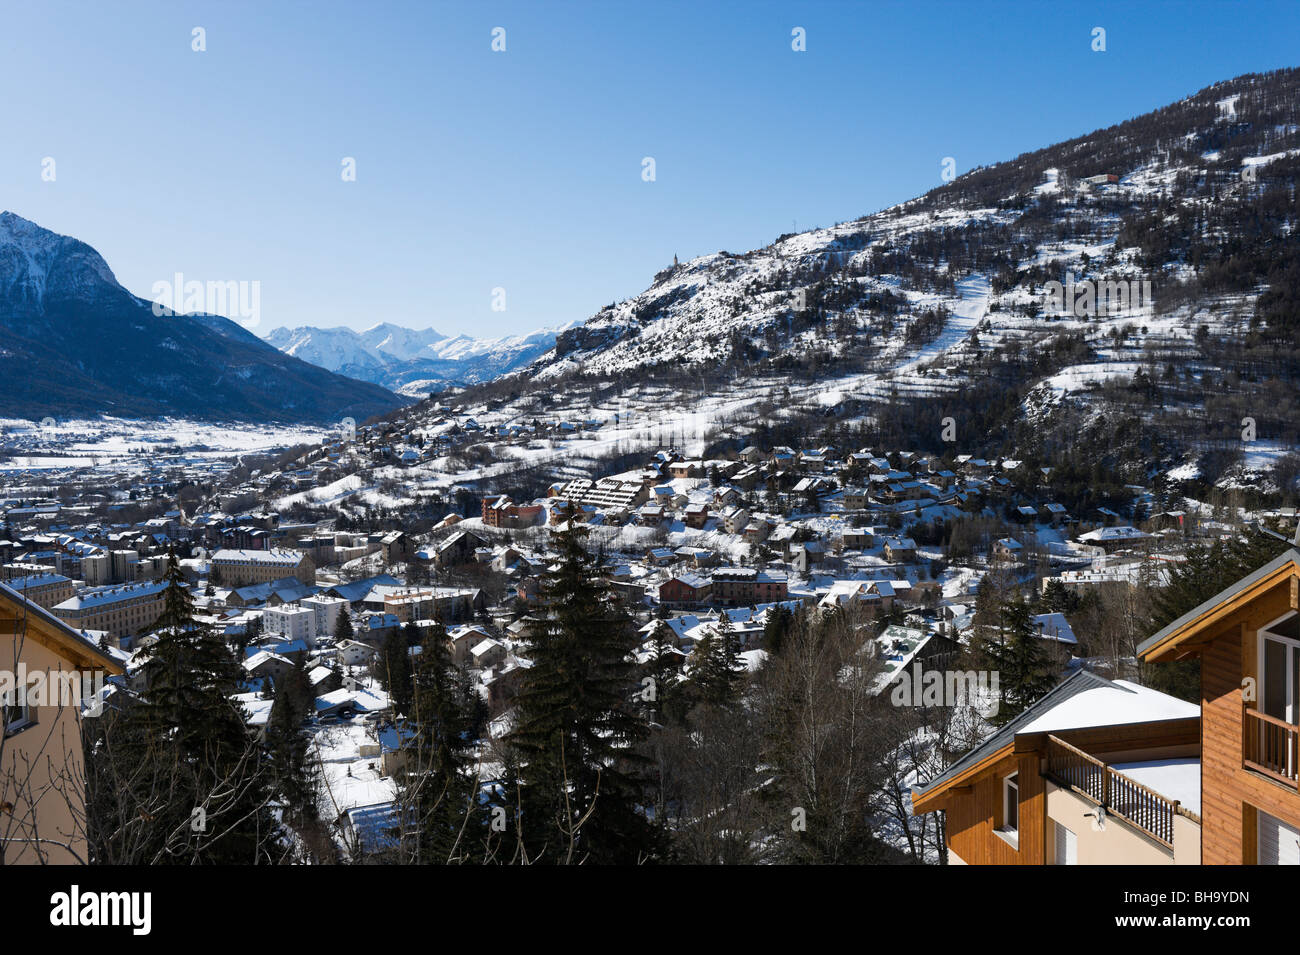 View over the town of Briancon, Serre Chevalier, Hautes Alpes, France Stock Photo